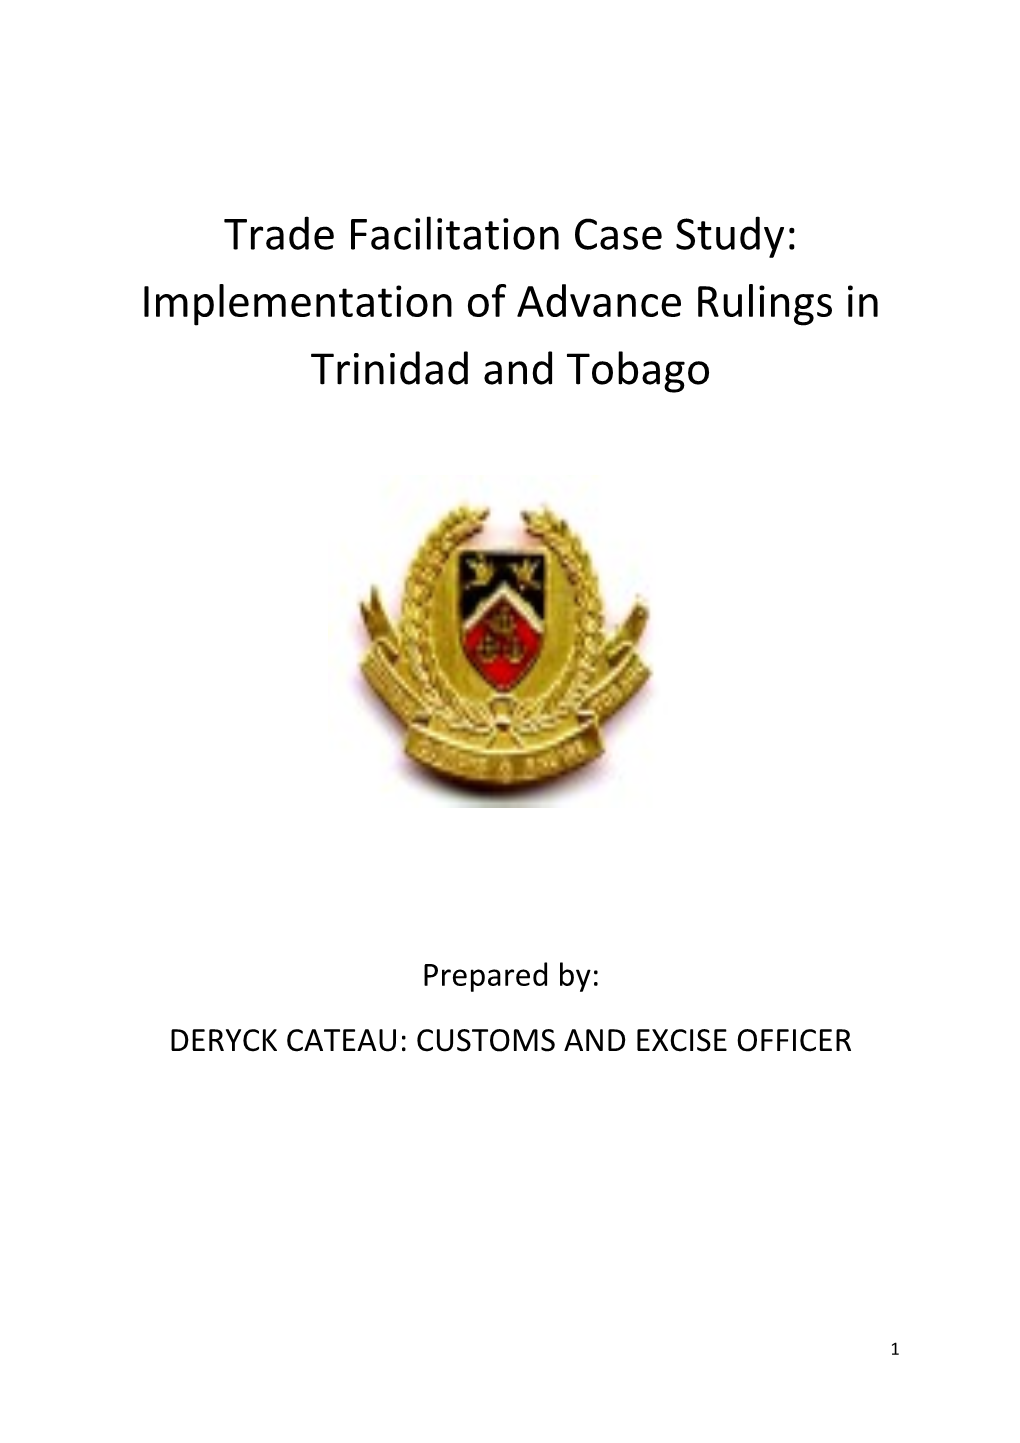 Trade Facilitation Case Study: Implementation of Advance Rulings in Trinidad and Tobago